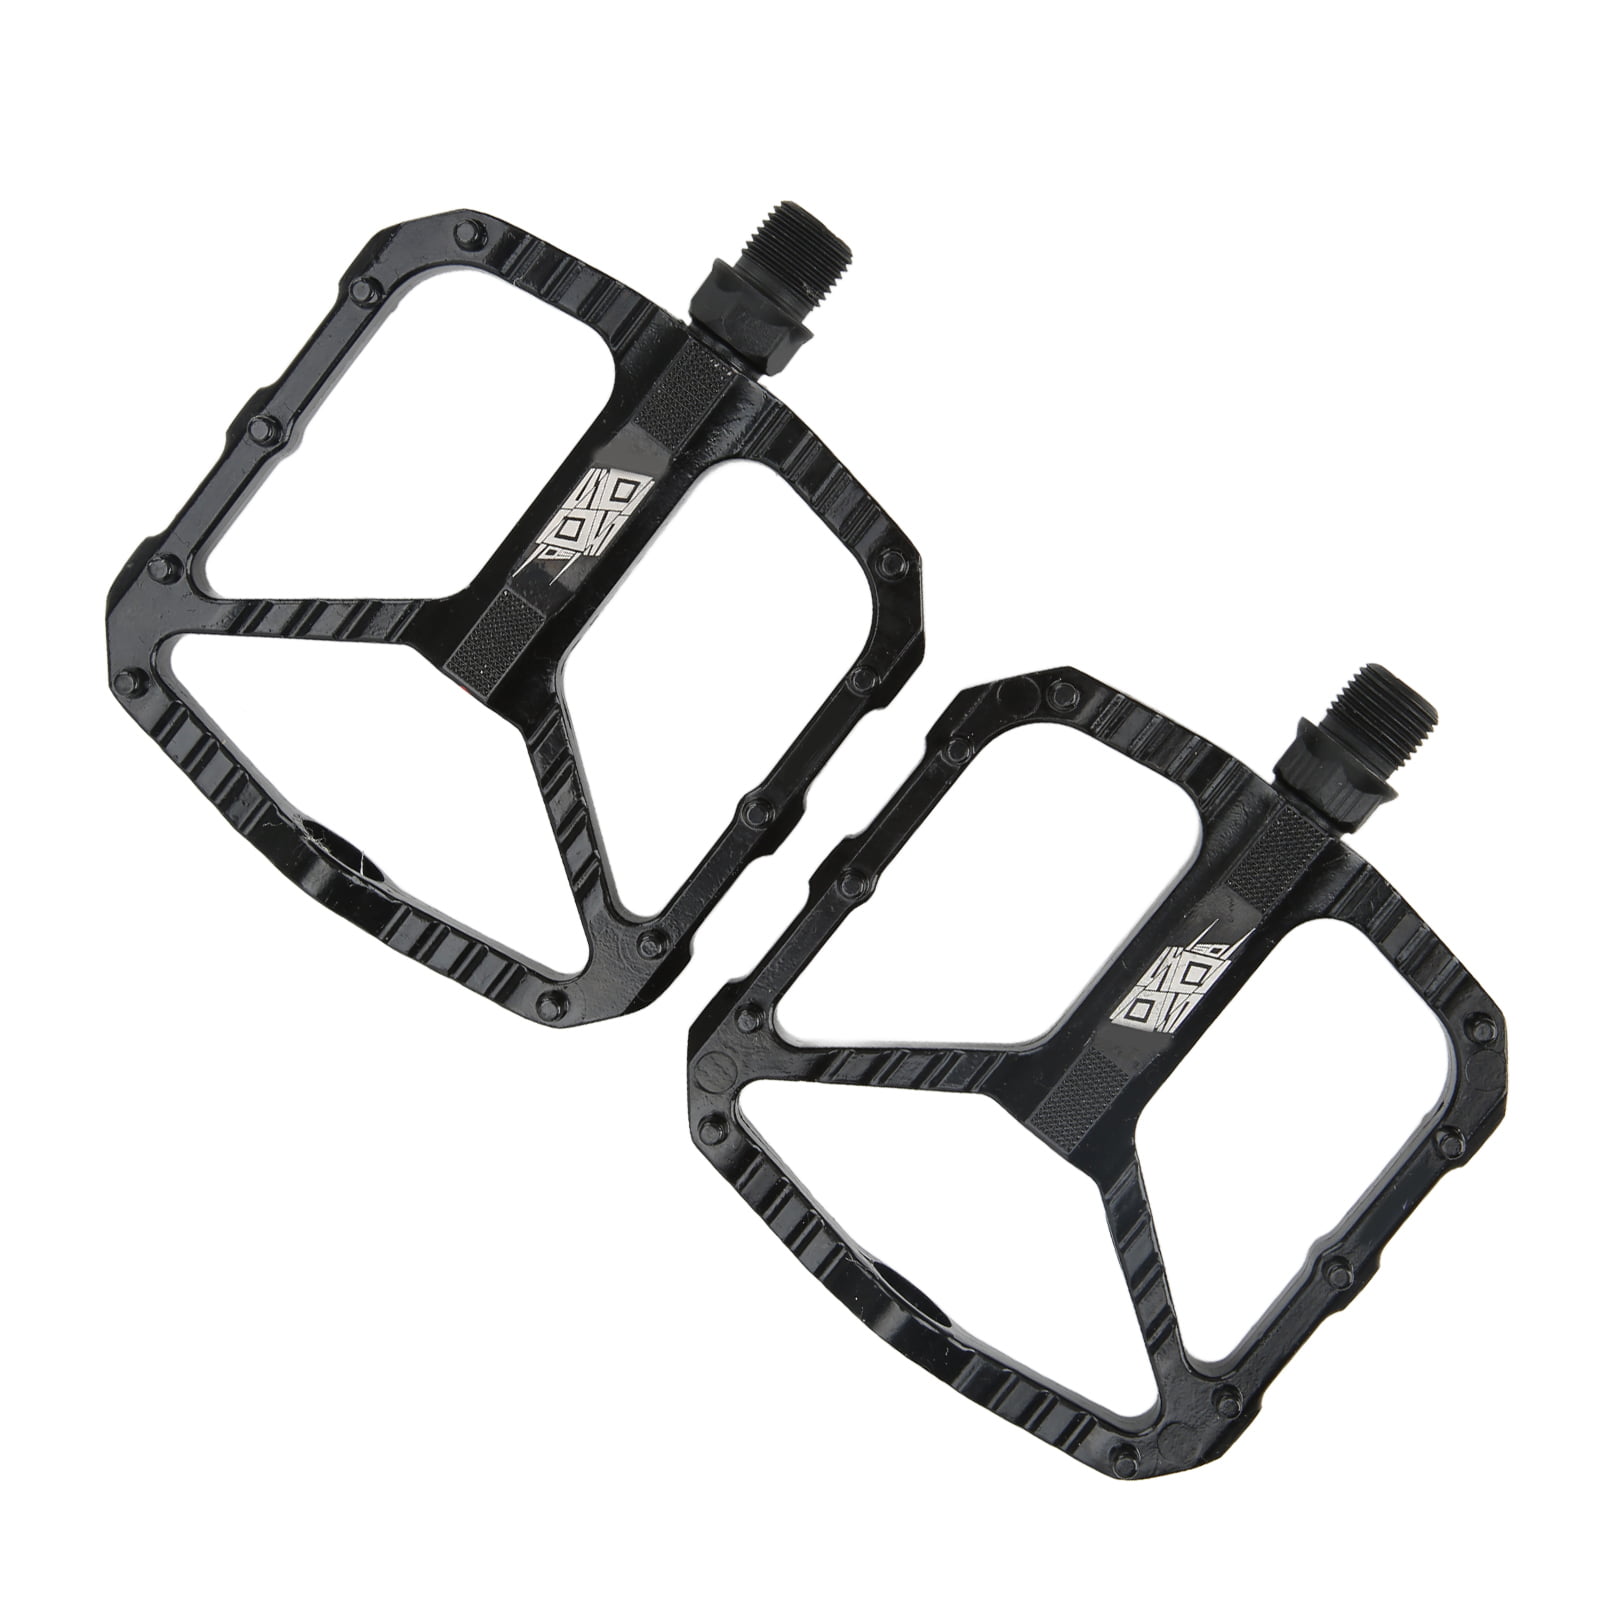 6267 2329 Metal Aluminum Alloy Pedal Bicycle Pedals Mountain Bike Movement 